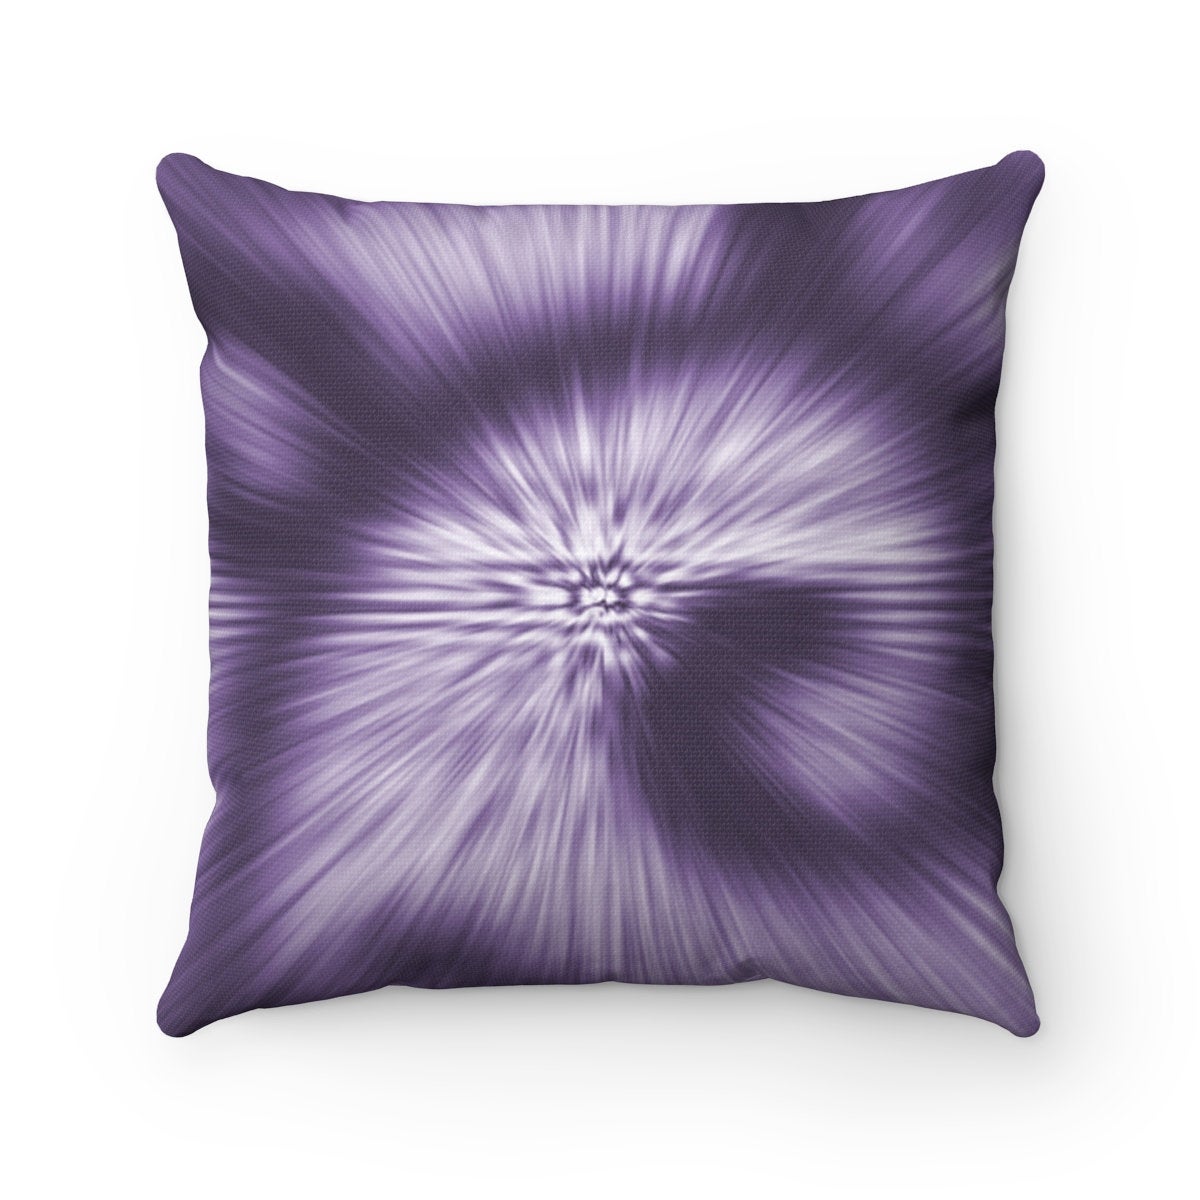 Abstract Pillow Cover, Purple Ombre Throw Pillow Cover, Girl Room Pillow Accent Pillows, Purple Home Decor, Nursery Pillow - EONS-PLW8